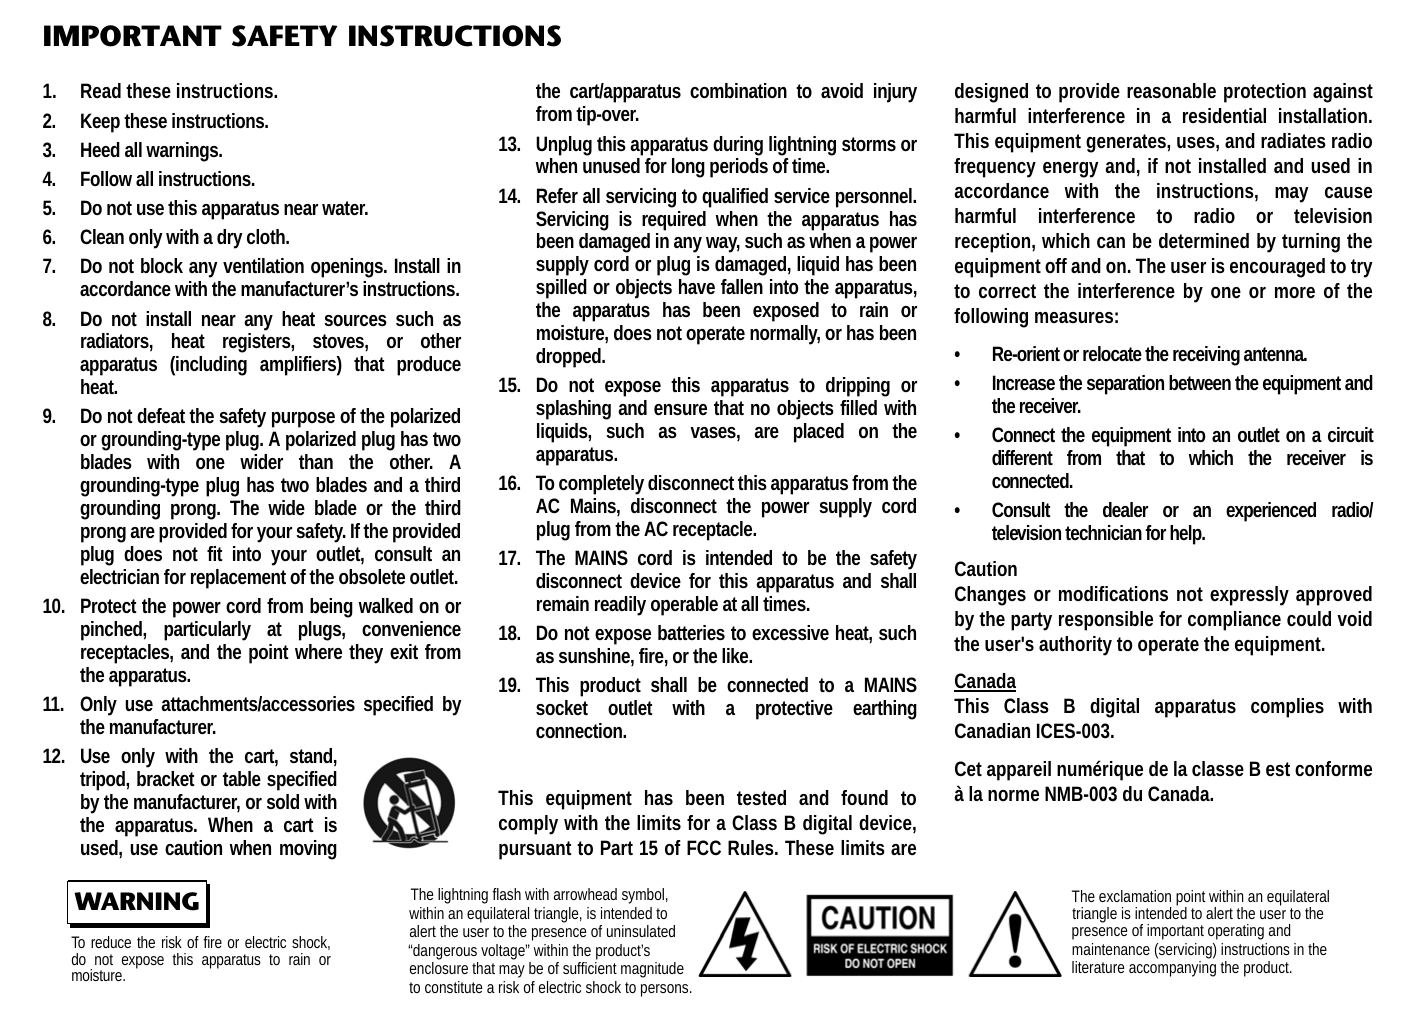 IMPORTANT SAFETY INSTRUCTIONS1. Read these instructions.2. Keep these instructions.3. Heed all warnings.4. Follow all instructions.5. Do not use this apparatus near water.6. Clean only with a dry cloth.7. Do not block any ventilation openings. Install inaccordance with the manufacturer’s instructions.8. Do not install near any heat sources such asradiators, heat registers, stoves, or otherapparatus (including amplifiers) that produceheat.9. Do not defeat the safety purpose of the polarizedor grounding-type plug. A polarized plug has twoblades with one wider than the other. Agrounding-type plug has two blades and a thirdgrounding prong. The wide blade or the thirdprong are provided for your safety. If the providedplug does not fit into your outlet, consult anelectrician for replacement of the obsolete outlet.10. Protect the power cord from being walked on orpinched, particularly at plugs, conveniencereceptacles, and the point where they exit fromthe apparatus.11. Only use attachments/accessories specified bythe manufacturer.12. Use only with the cart, stand,tripod, bracket or table specifiedby the manufacturer, or sold withthe apparatus. When a cart isused, use caution when movingthe cart/apparatus combination to avoid injuryfrom tip-over.13. Unplug this apparatus during lightning storms orwhen unused for long periods of time.14. Refer all servicing to qualified service personnel.Servicing is required when the apparatus hasbeen damaged in any way, such as when a powersupply cord or plug is damaged, liquid has beenspilled or objects have fallen into the apparatus,the apparatus has been exposed to rain ormoisture, does not operate normally, or has beendropped.15. Do not expose this apparatus to dripping orsplashing and ensure that no objects filled withliquids, such as vases, are placed on theapparatus.16. To completely disconnect this apparatus from theAC Mains, disconnect the power supply cordplug from the AC receptacle.17. The MAINS cord is intended to be the safetydisconnect device for this apparatus and shallremain readily operable at all times.18. Do not expose batteries to excessive heat, suchas sunshine, fire, or the like.19. This product shall be connected to a MAINSsocket outlet with a protective earthingconnection.This equipment has been tested and found tocomply with the limits for a Class B digital device,pursuant to Part 15 of FCC Rules. These limits aredesigned to provide reasonable protection againstharmful interference in a residential installation.This equipment generates, uses, and radiates radiofrequency energy and, if not installed and used inaccordance with the instructions, may causeharmful interference to radio or televisionreception, which can be determined by turning theequipment off and on. The user is encouraged to tryto correct the interference by one or more of thefollowing measures:• Re-orient or relocate the receiving antenna.• Increase the separation between the equipment andthe receiver.• Connect the equipment into an outlet on a circuitdifferent from that to which the receiver isconnected.• Consult the dealer or an experienced radio/television technician for help.CautionChanges or modifications not expressly approvedby the party responsible for compliance could voidthe user&apos;s authority to operate the equipment.CanadaThis Class B digital apparatus complies withCanadian ICES-003.Cet appareil numérique de la classe B est conformeà la norme NMB-003 du Canada.To reduce the risk of fire or electric shock,do not expose this apparatus to rain ormoisture. WARNING The lightning flash with arrowhead symbol, The exclamation point within an equilateral triangle is intended to alert the user to thepresence of important operating andmaintenance (servicing) instructions in theliterature accompanying the product.within an equilateral triangle, is intended toalert the user to the presence of uninsulated“dangerous voltage” within the product’senclosure that may be of sufficient magnitudeto constitute a risk of electric shock to persons.